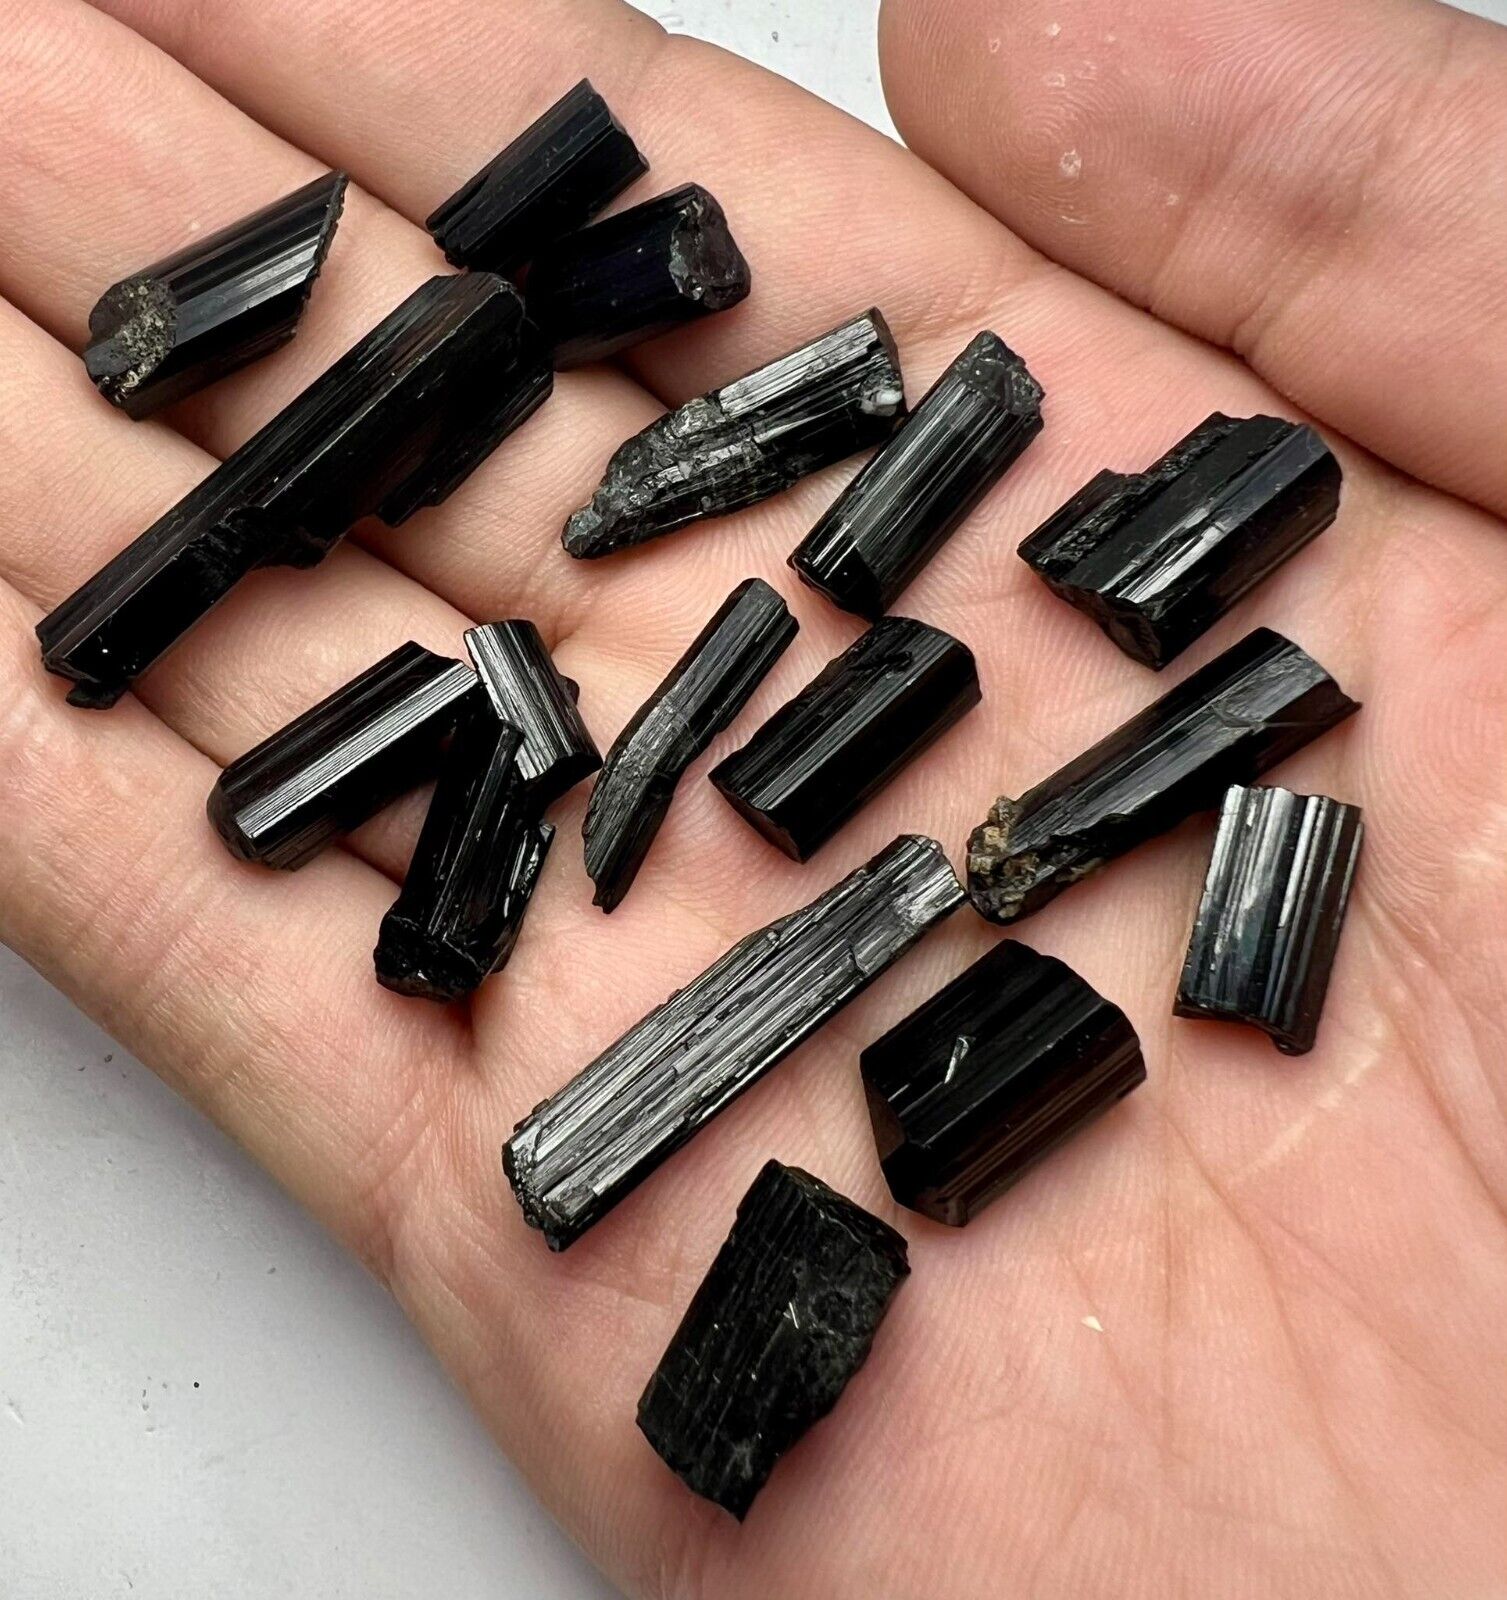 141 Carats Well Terminated Black Tourmaline Huge Crystals Rough Lot From @AFG